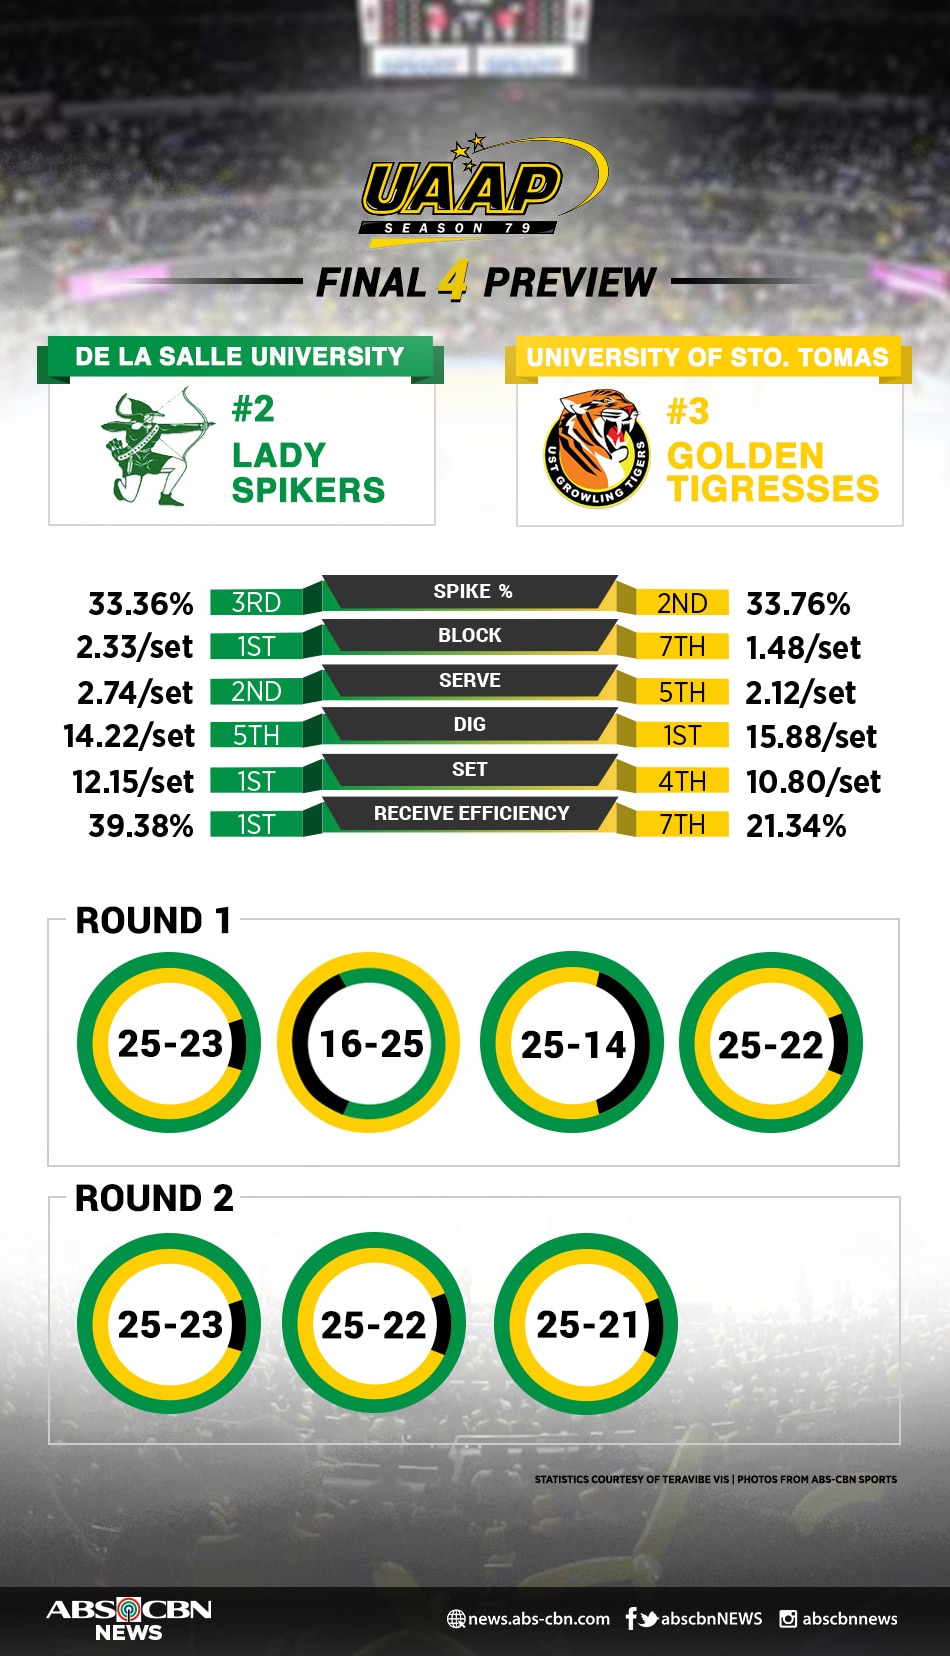 UAAP Final 4 Preview La Salle vs. UST ABSCBN News